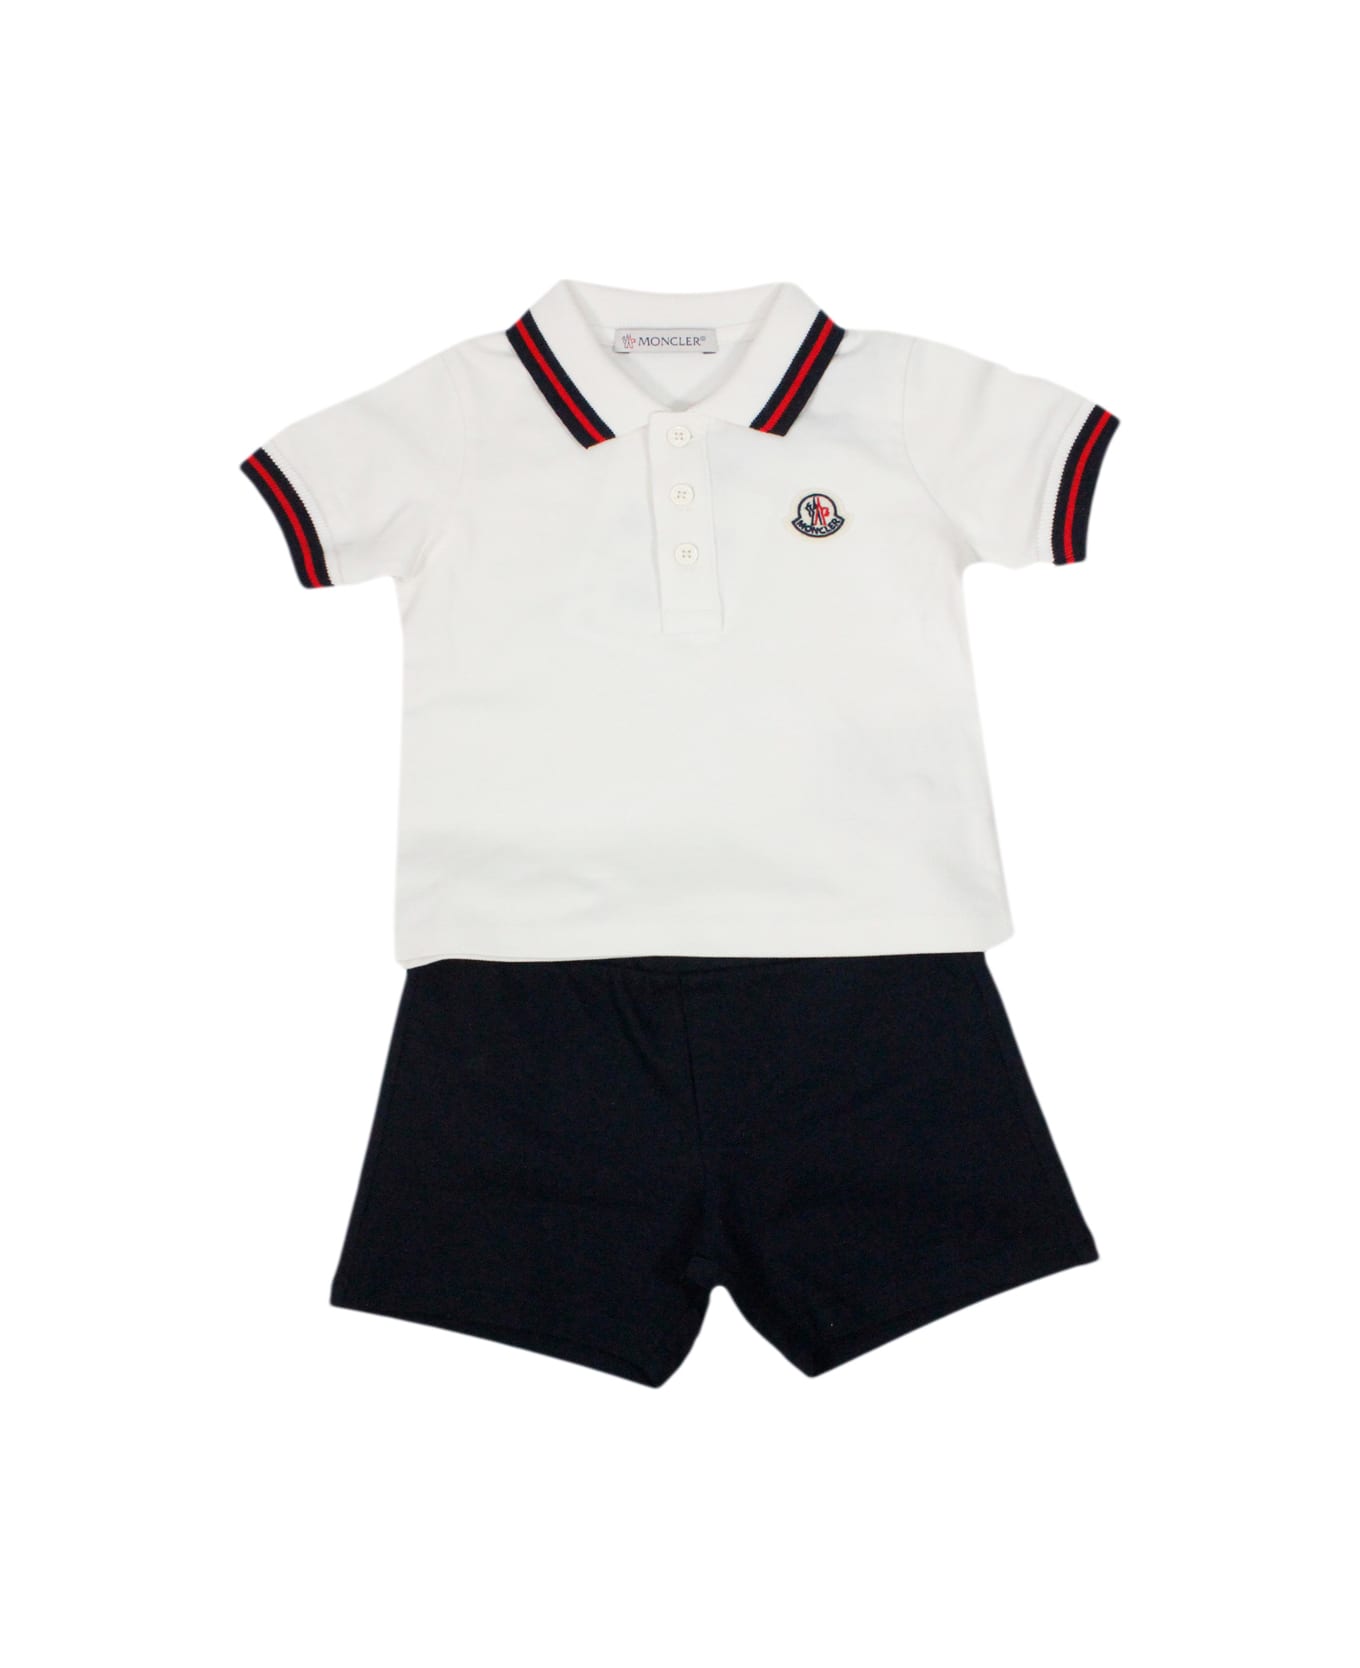 Moncler Complete With Short Sleeve Polo Shirt And Shorts With Elastic Waist - White ジャンプスーツ